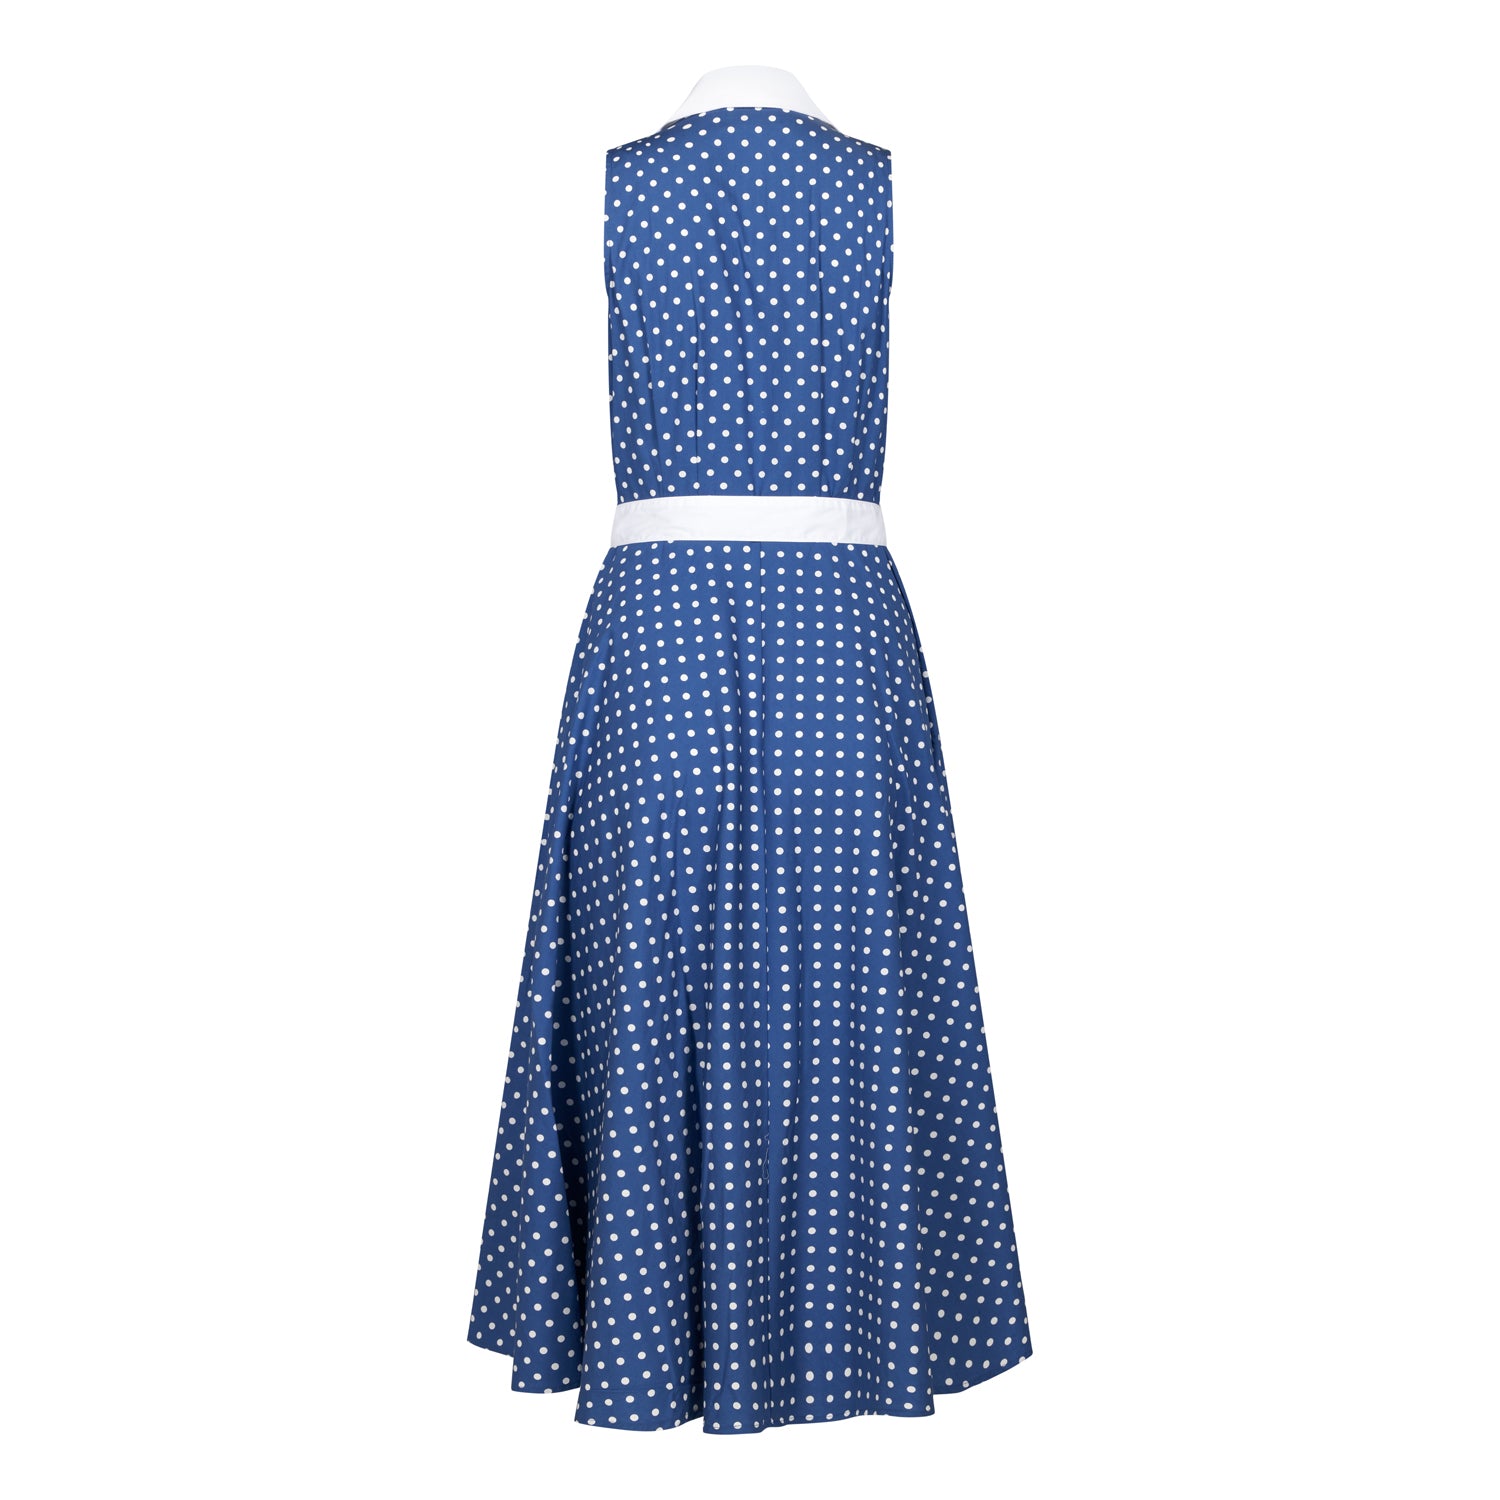 Ghost image, back view of blue and white fit and flare polka dot midi dress.  Collar and belt is contrast white. 